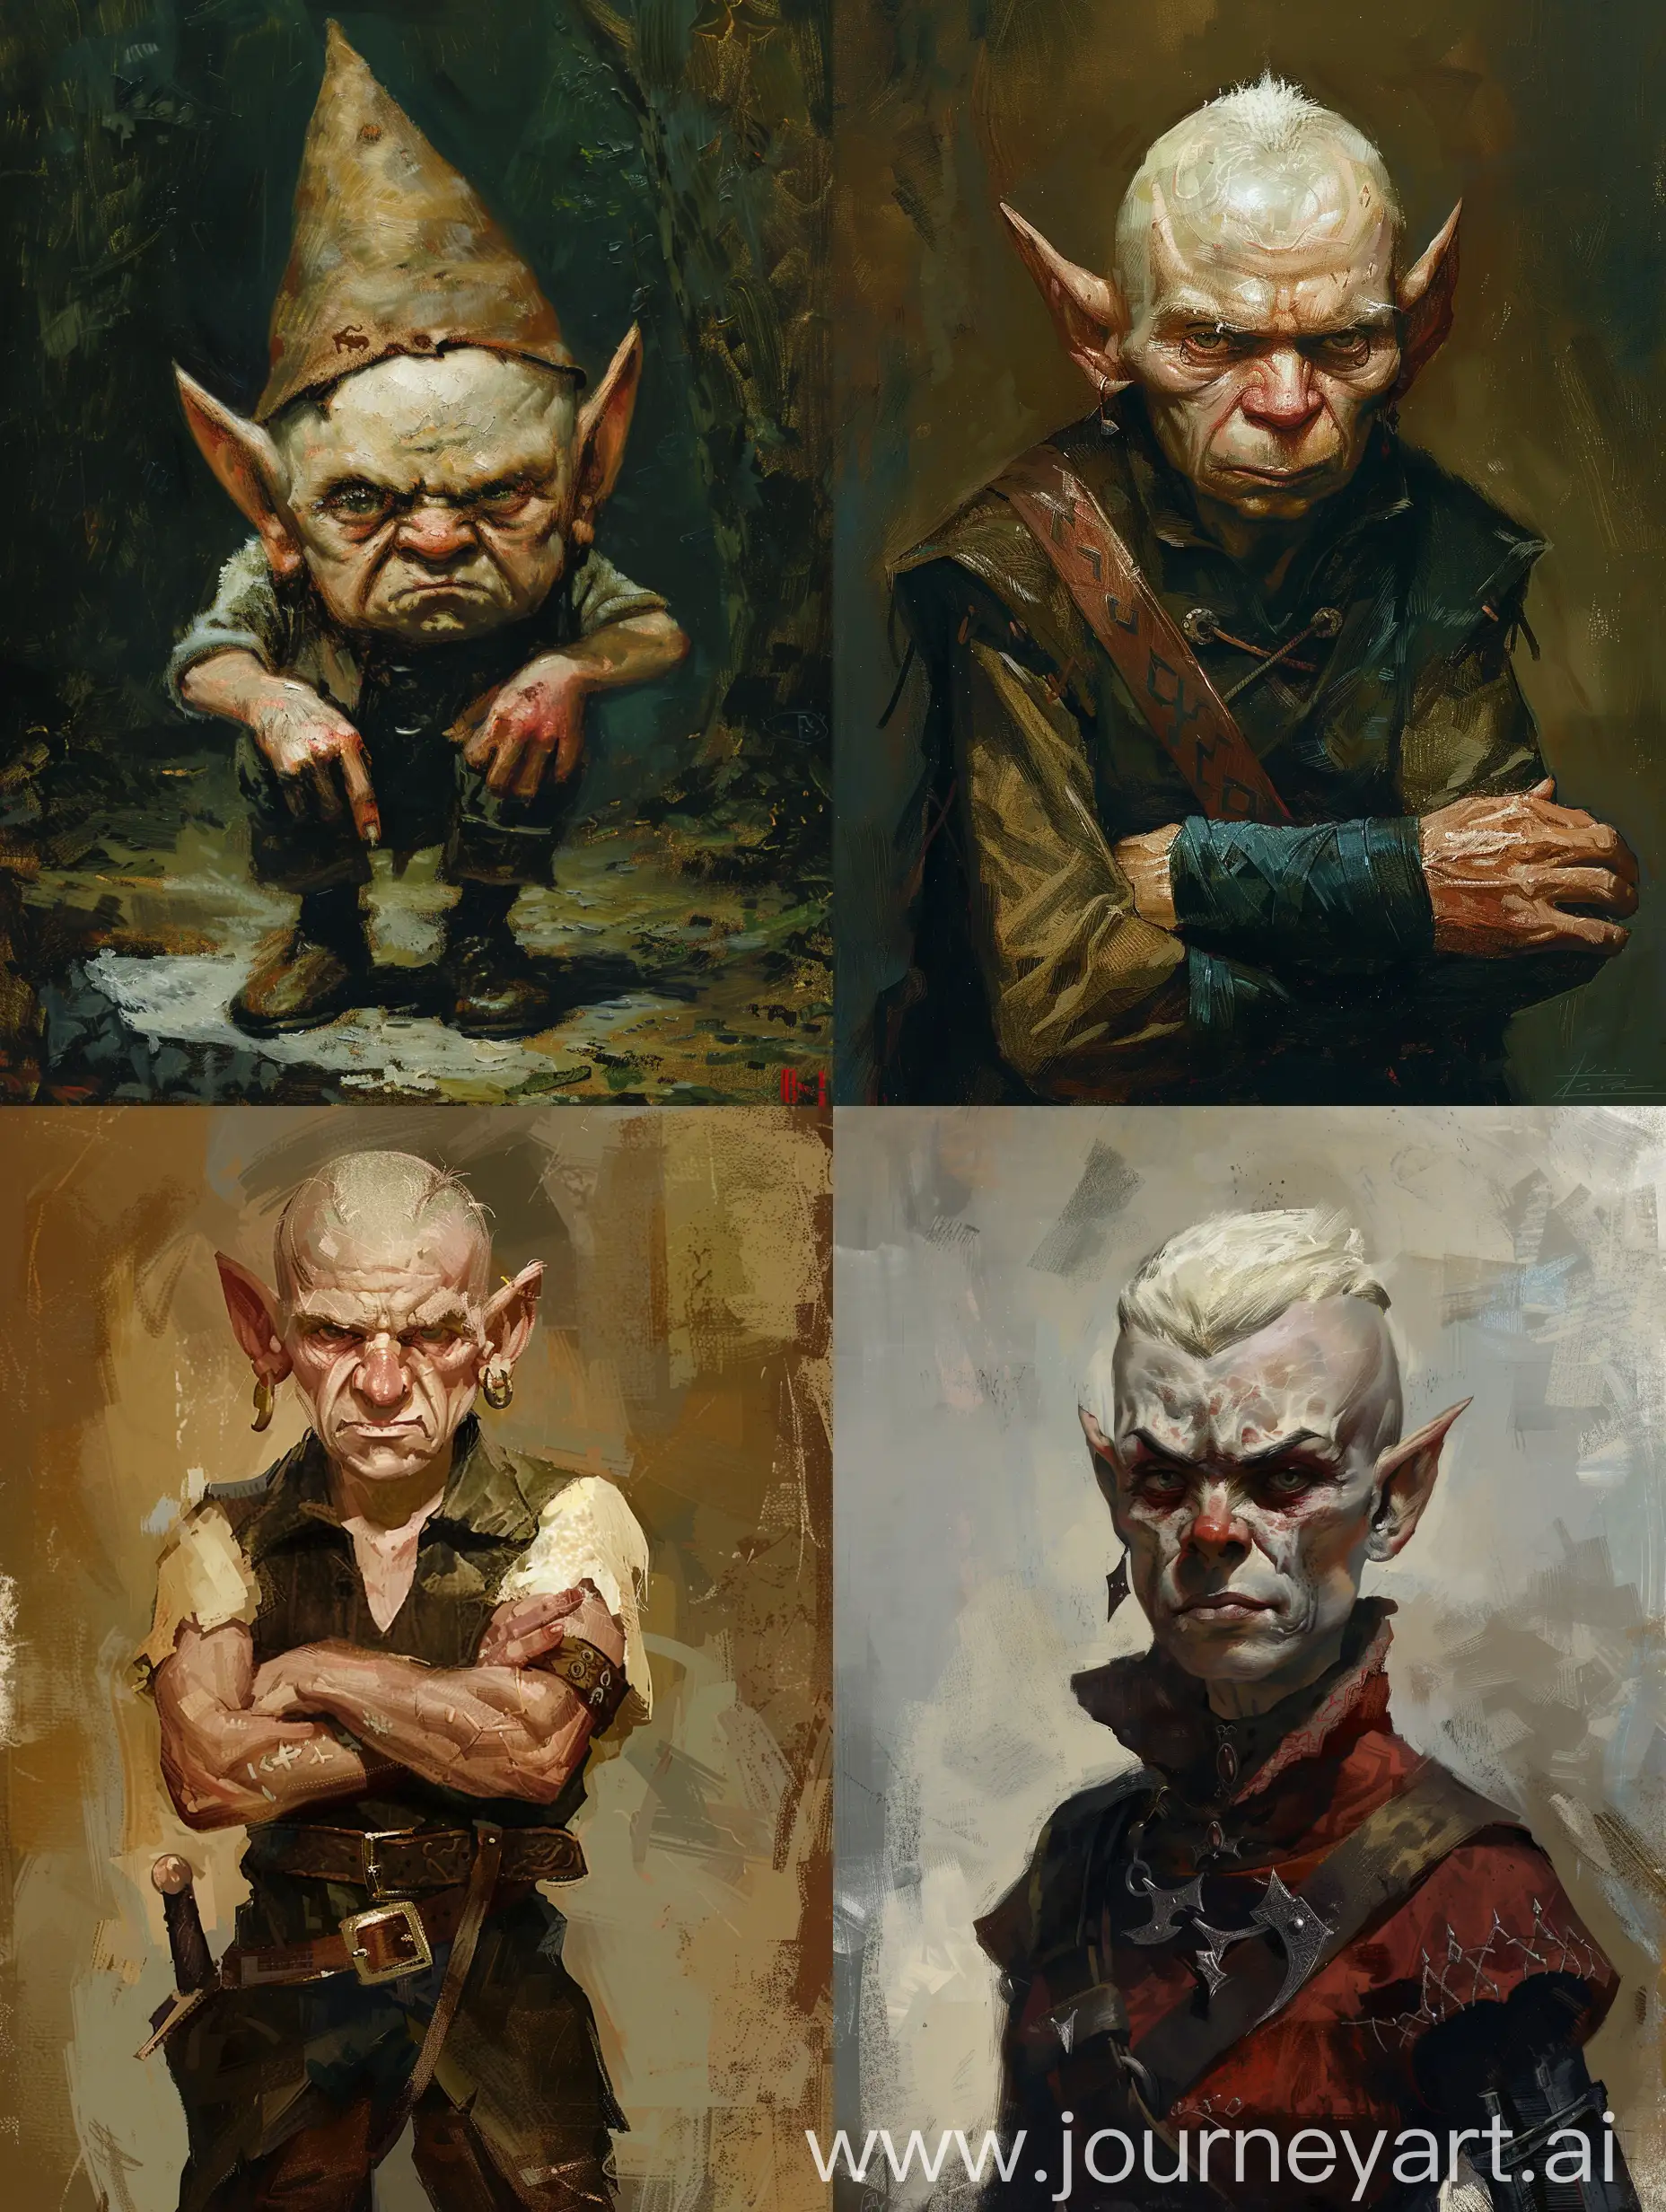 Serious-HalfGnome-Warrior-Poses-for-Dungeons-and-Dragons-Battle